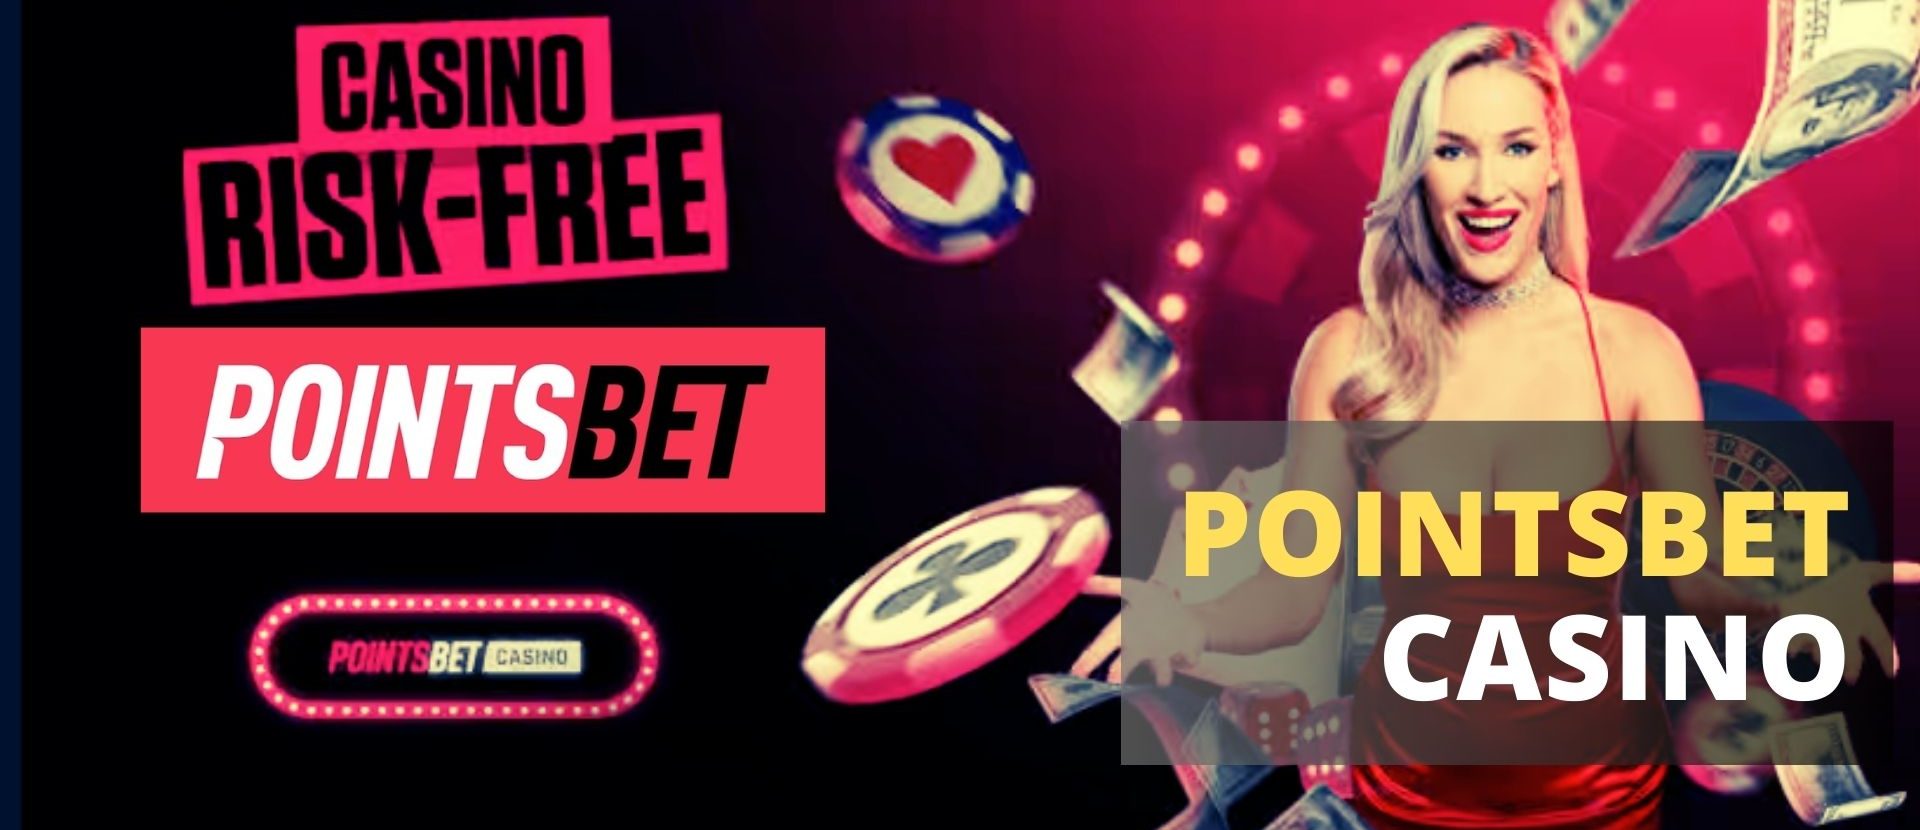 PointsBet: The Future of Online Sports Betting and Online Casinos in the USA